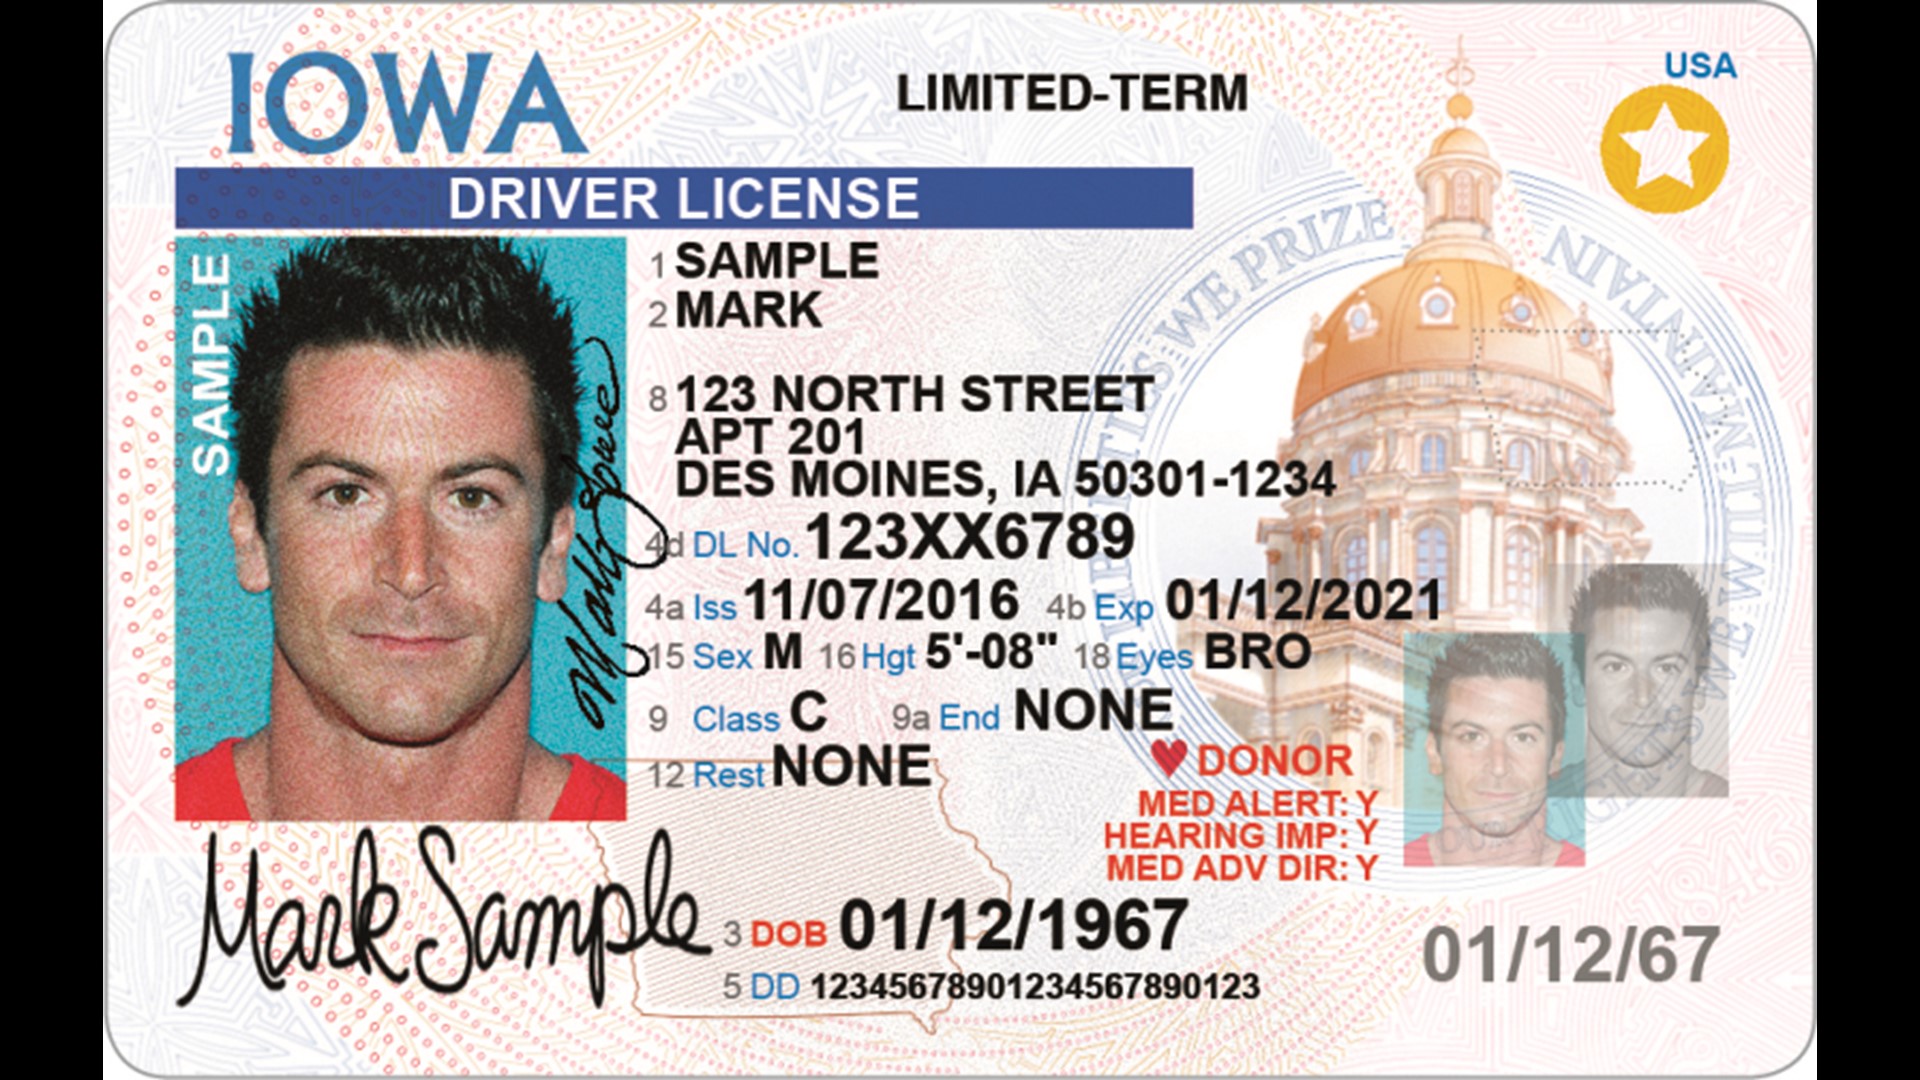 Iowa introduces new look to driver’s licenses